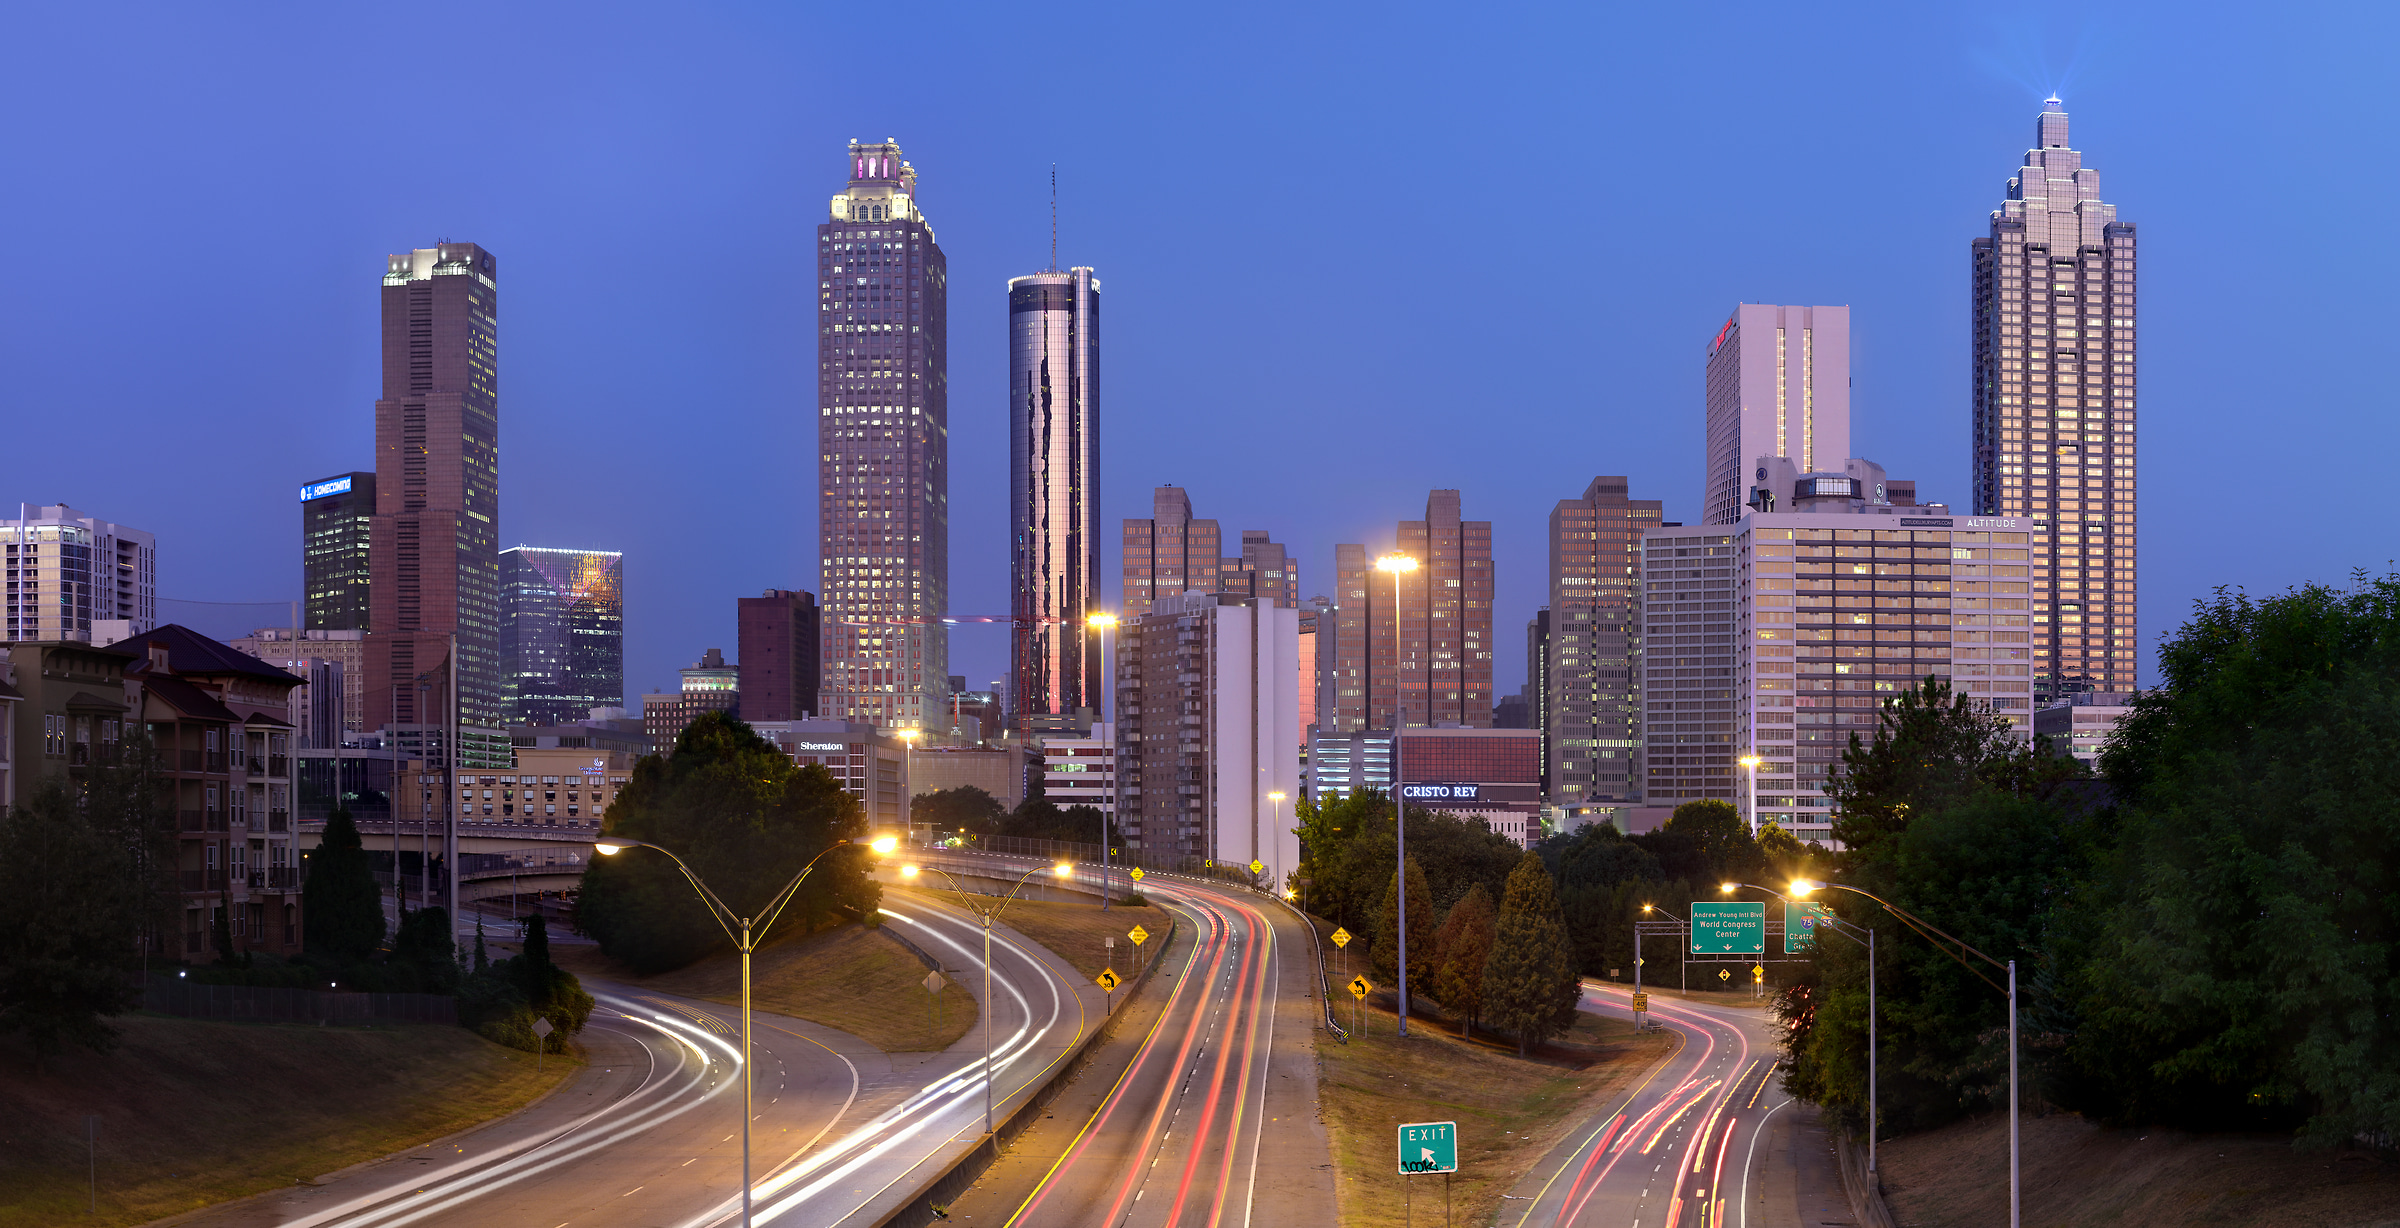 344 megapixels! A very high resolution, large-format VAST photo print of the Atlanta skyline at dusk with highways in the foreground; photograph created by Phil Crawshay in Jackson Street Bridge, Atlanta Georgia.